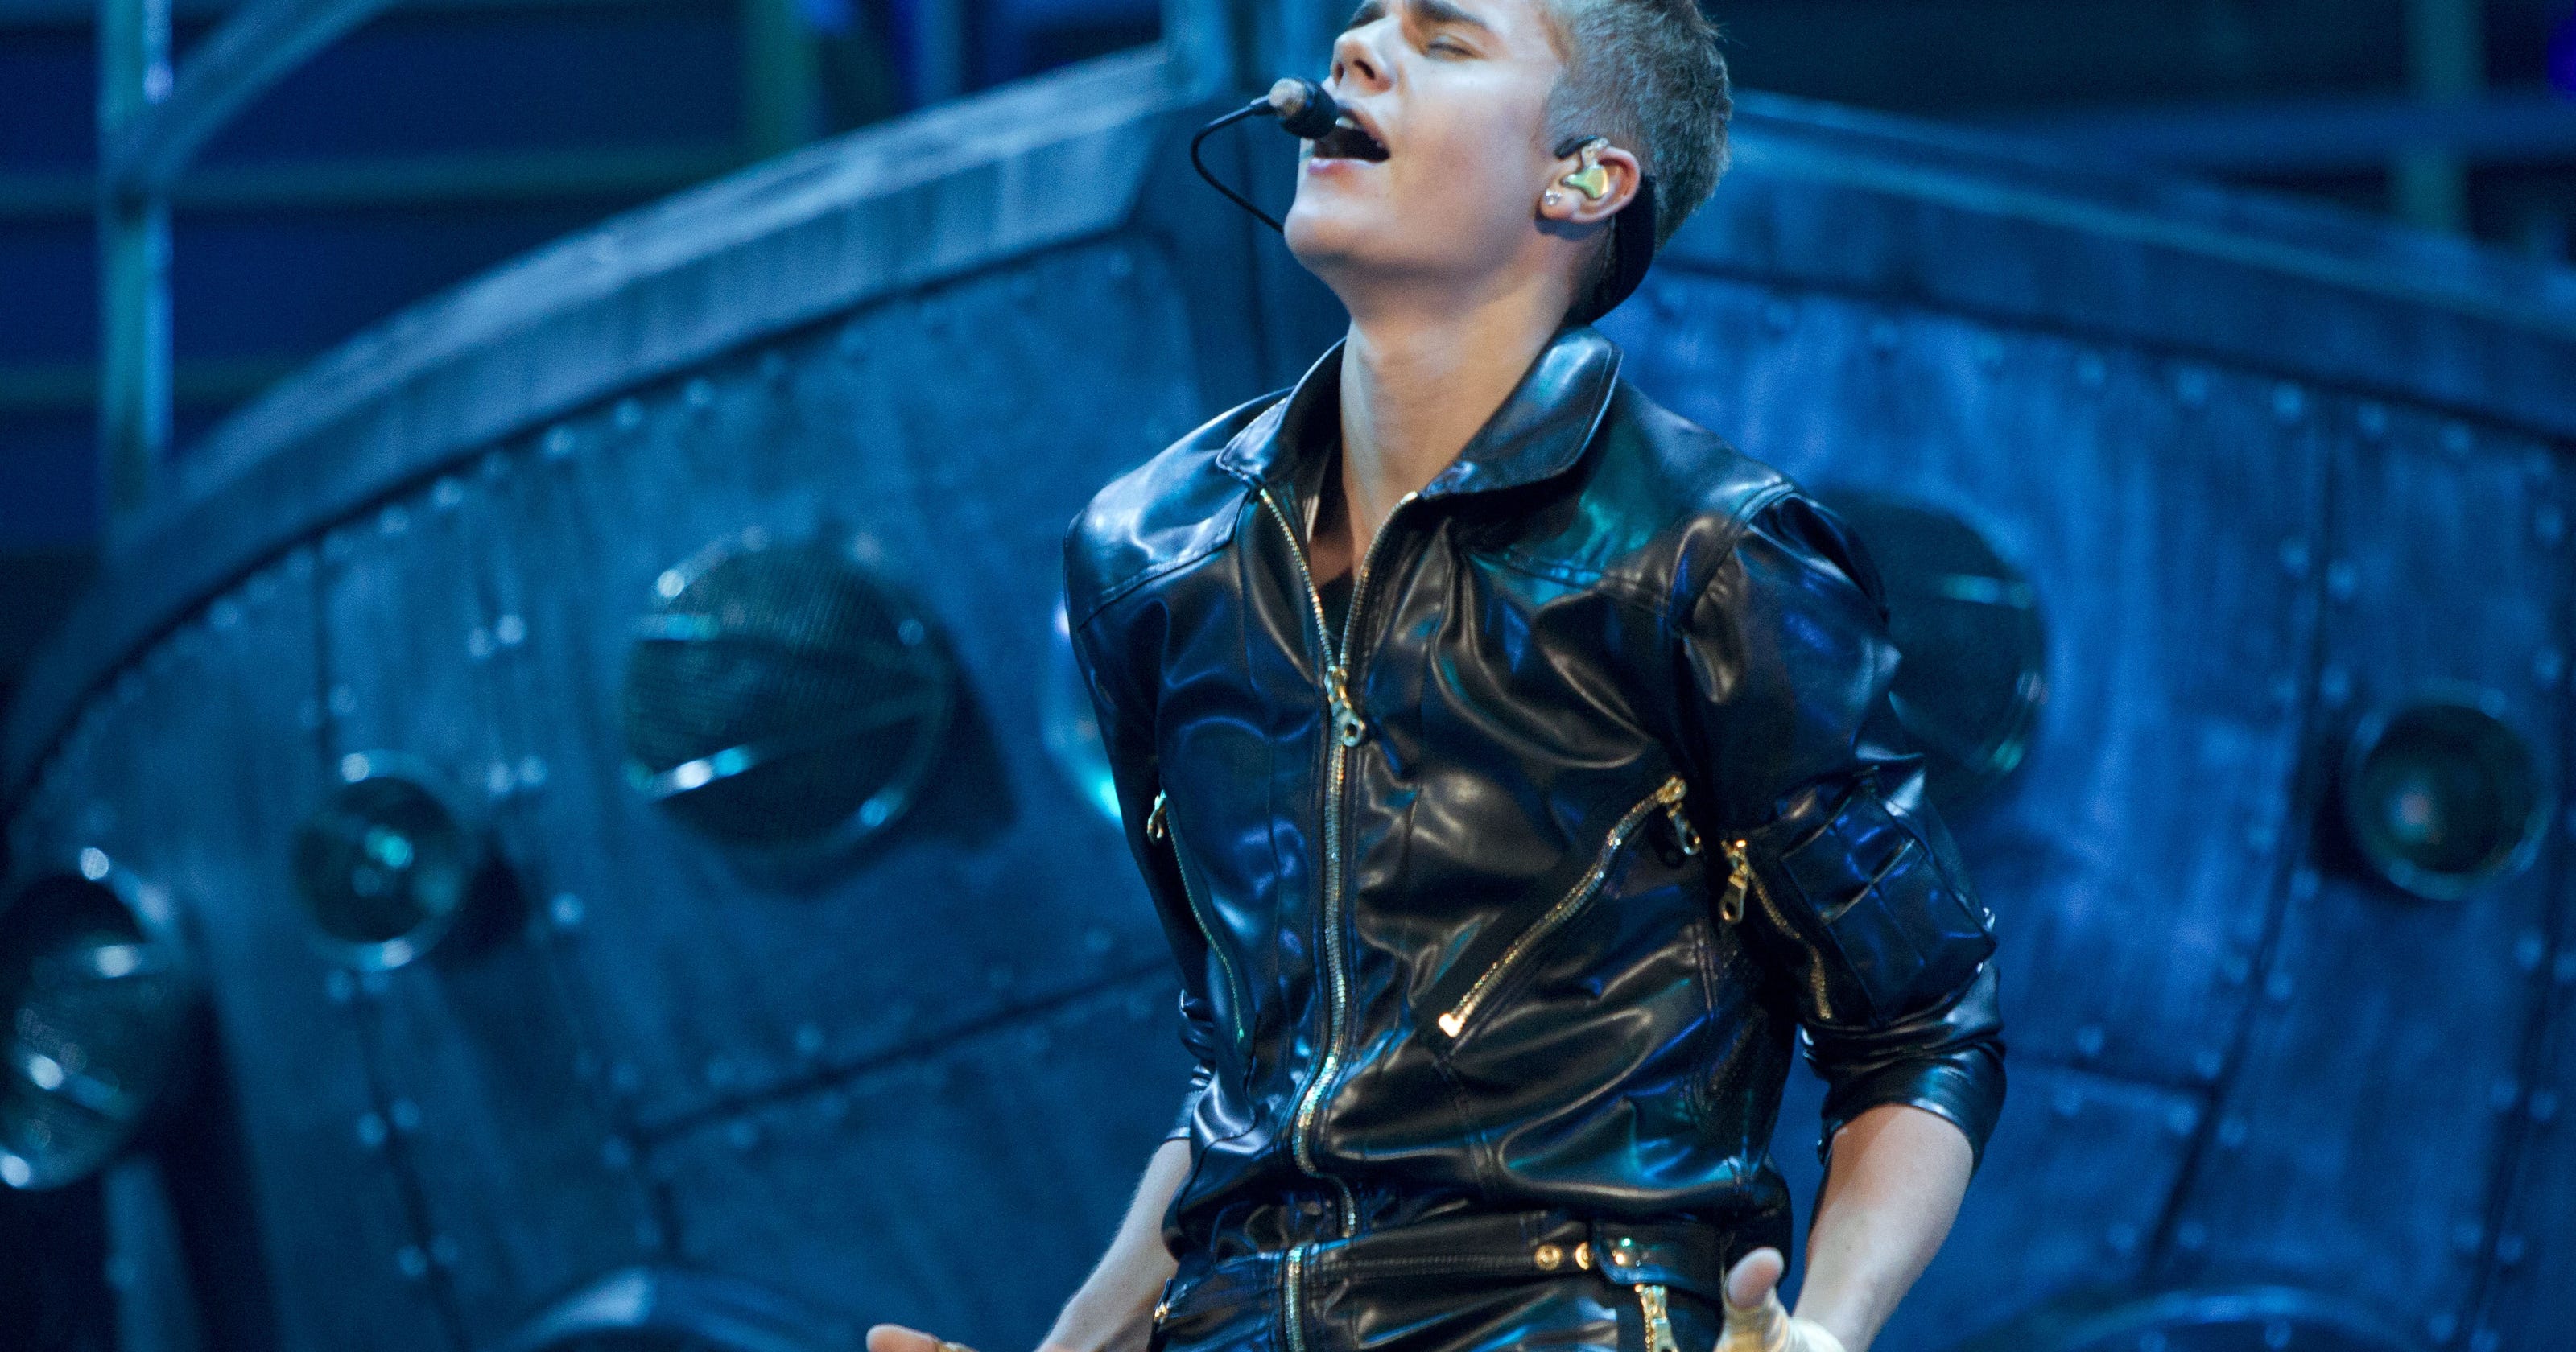 Justin Bieber: Images from 'Believe' tour